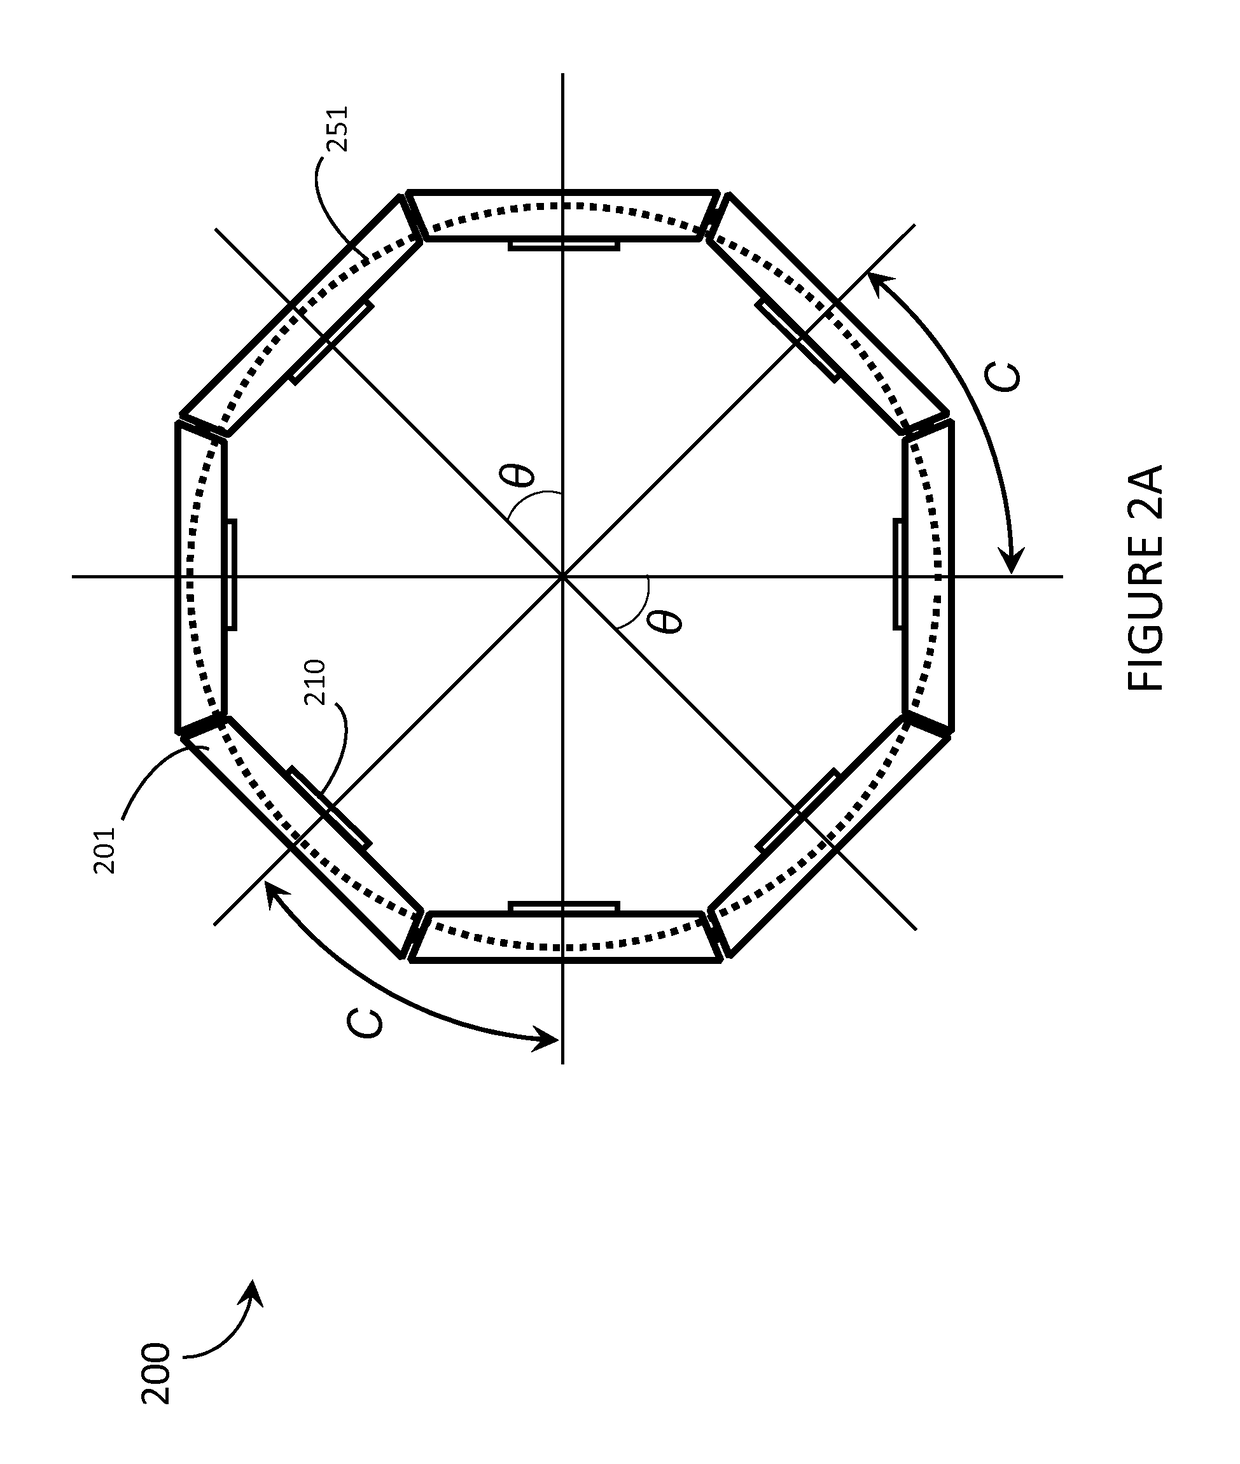 Systems, articles and methods for wearable electronic devices that accommodate different user forms